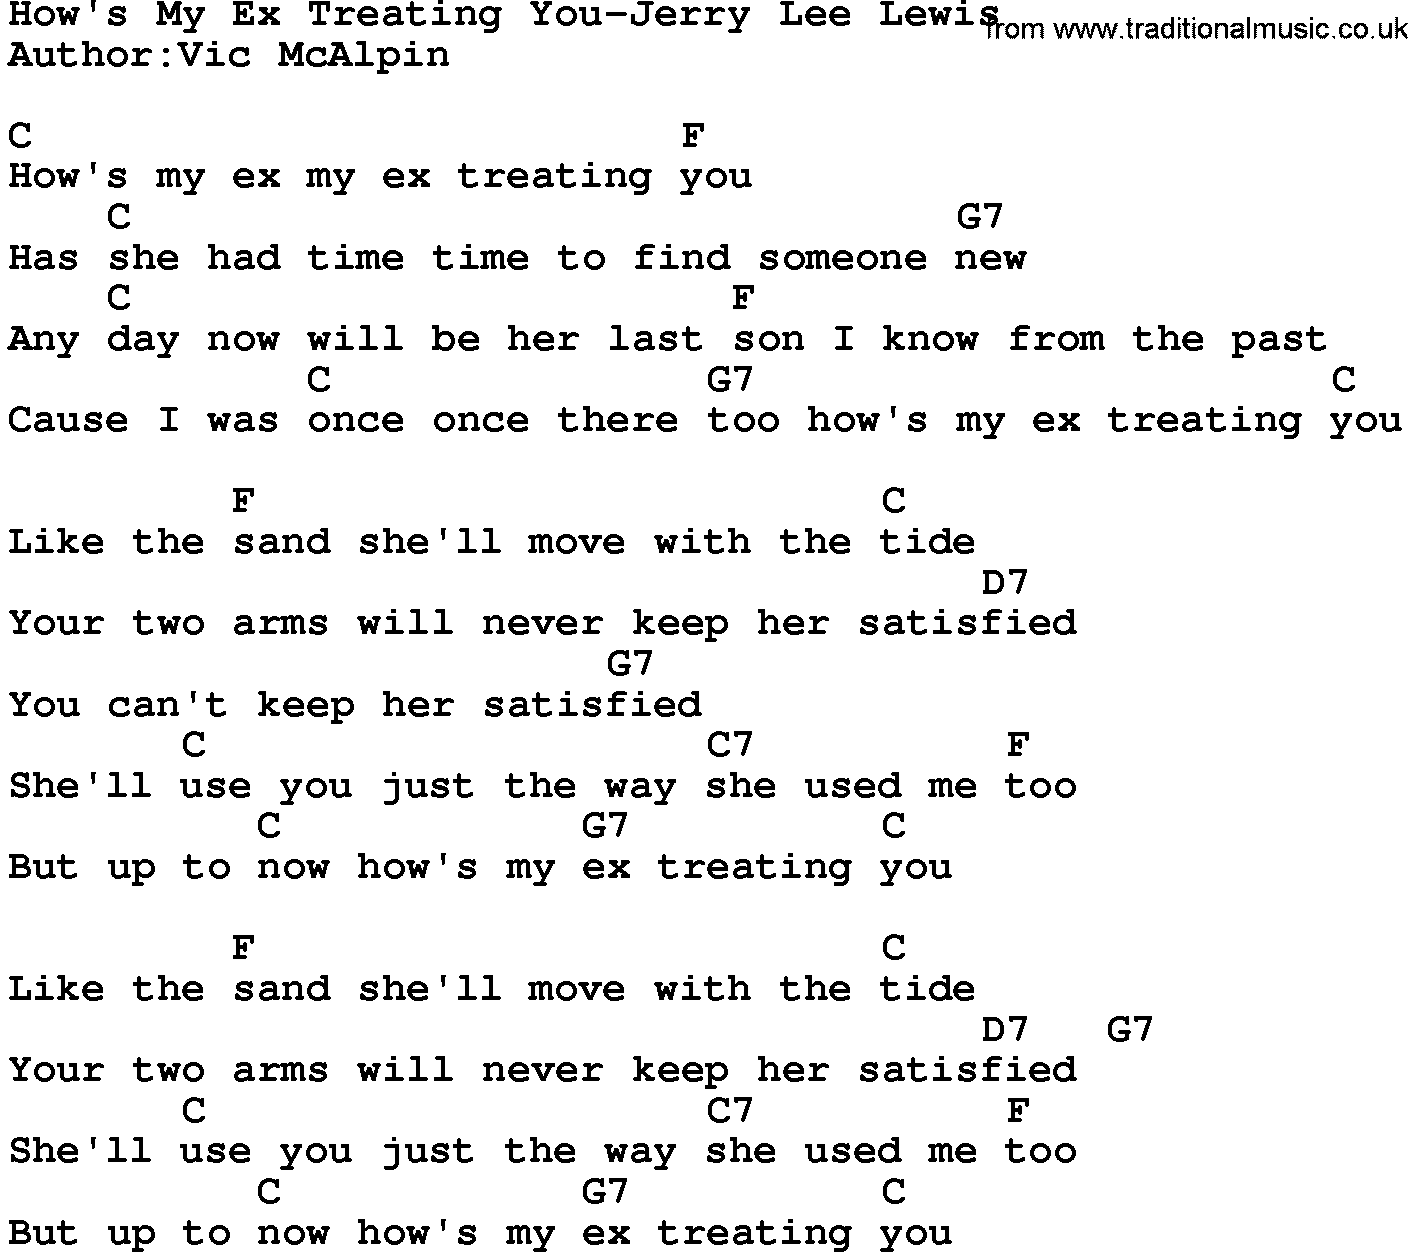 Country music song: How's My Ex Treating You-Jerry Lee Lewis lyrics and chords